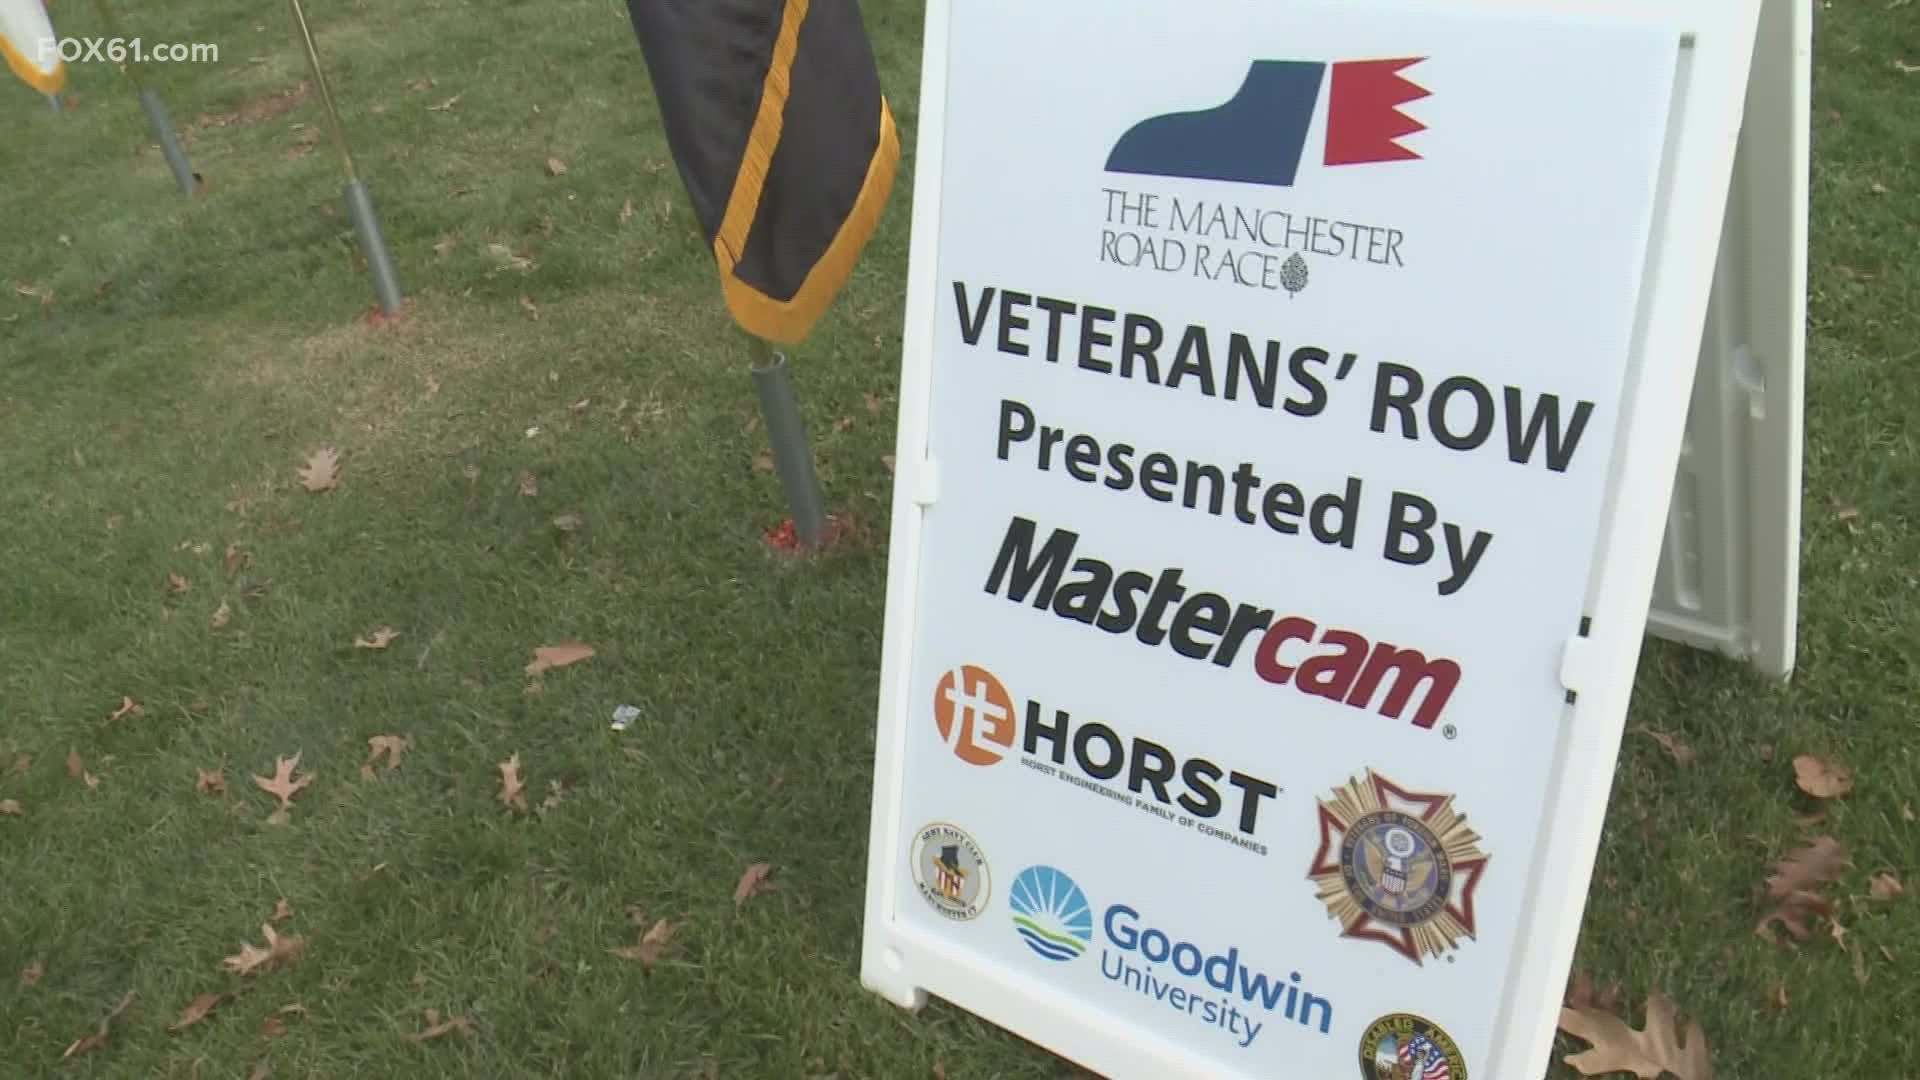 The Manchester Road Race has been honoring veterans for four years now, thanking them for their service.